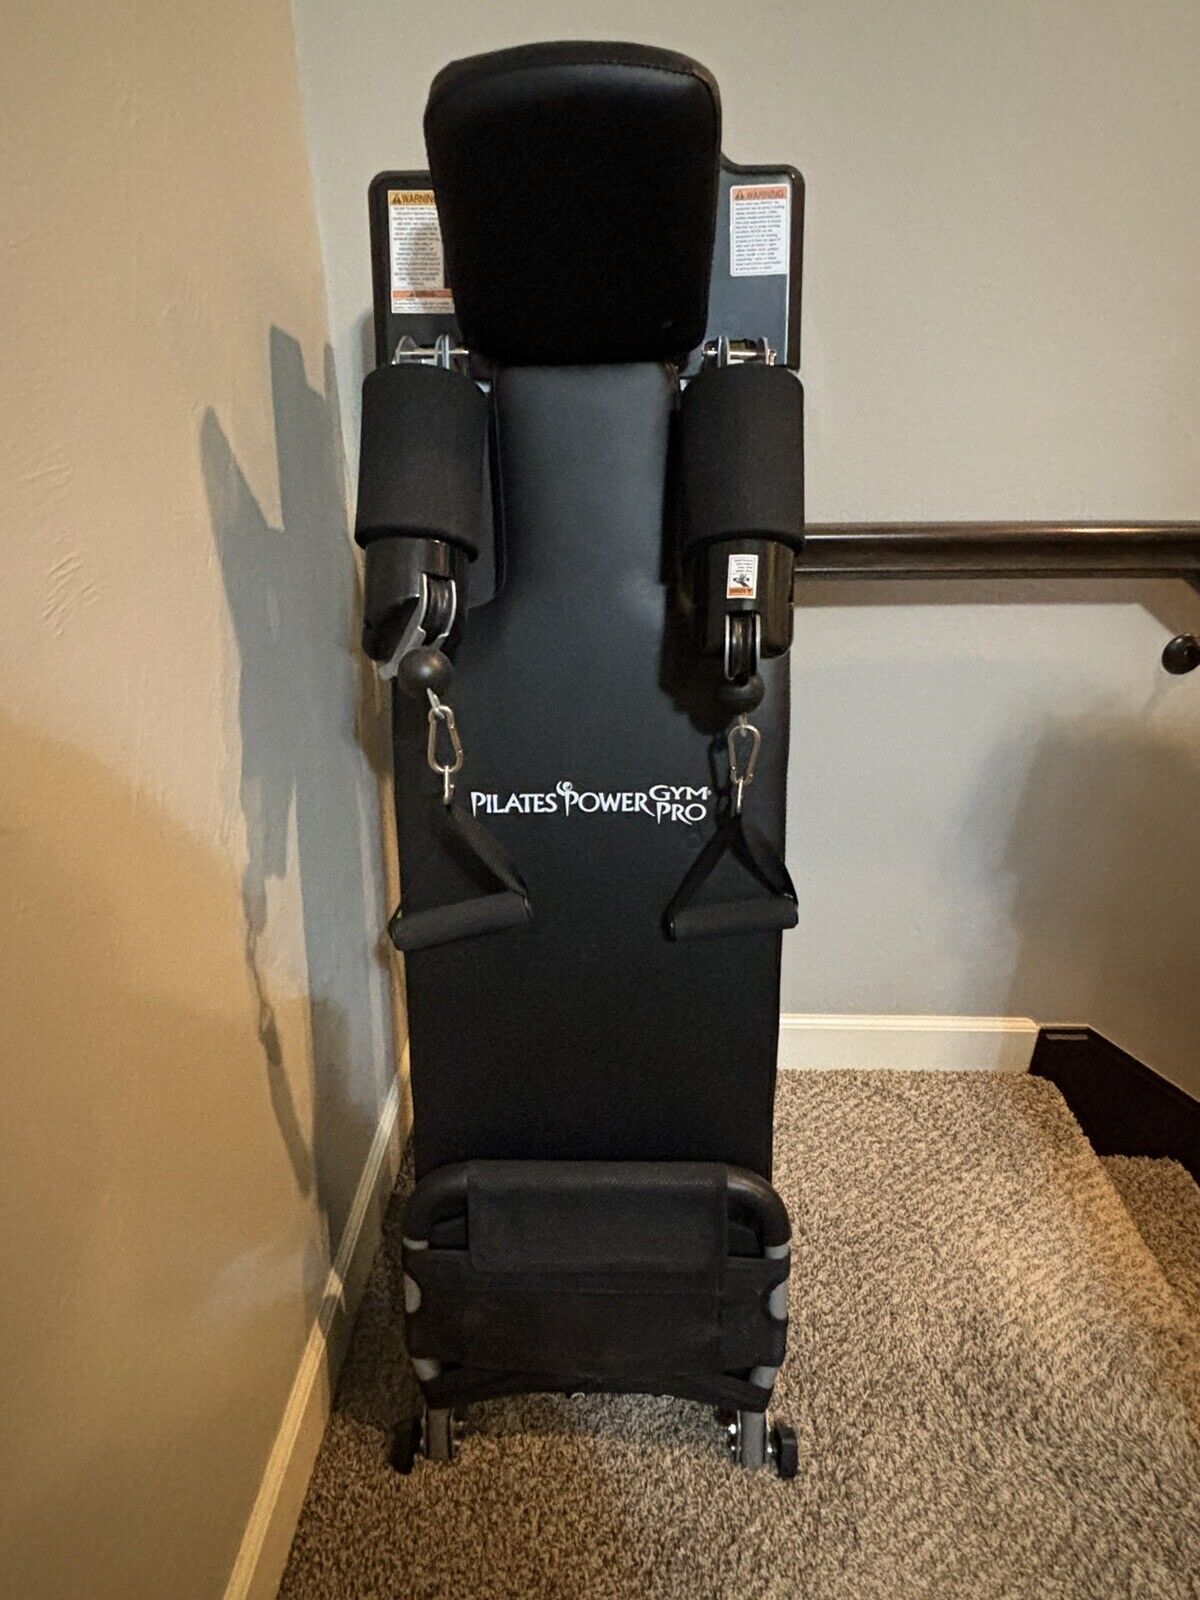 NEW!!! Pilates PowerGym Pro Never Been Used